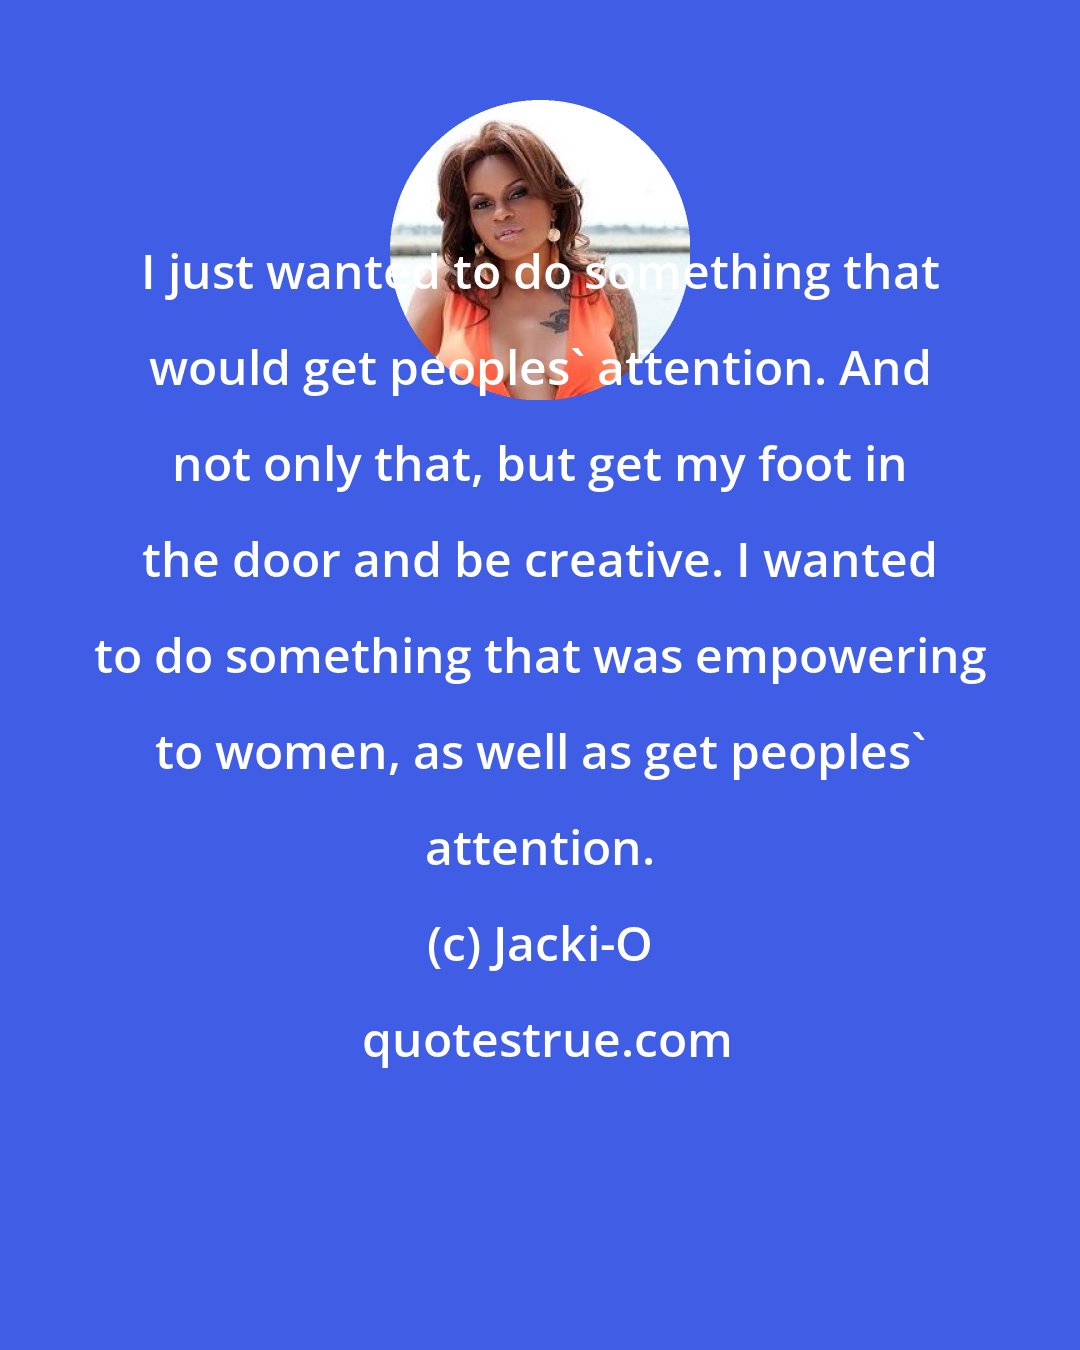 Jacki-O: I just wanted to do something that would get peoples' attention. And not only that, but get my foot in the door and be creative. I wanted to do something that was empowering to women, as well as get peoples' attention.